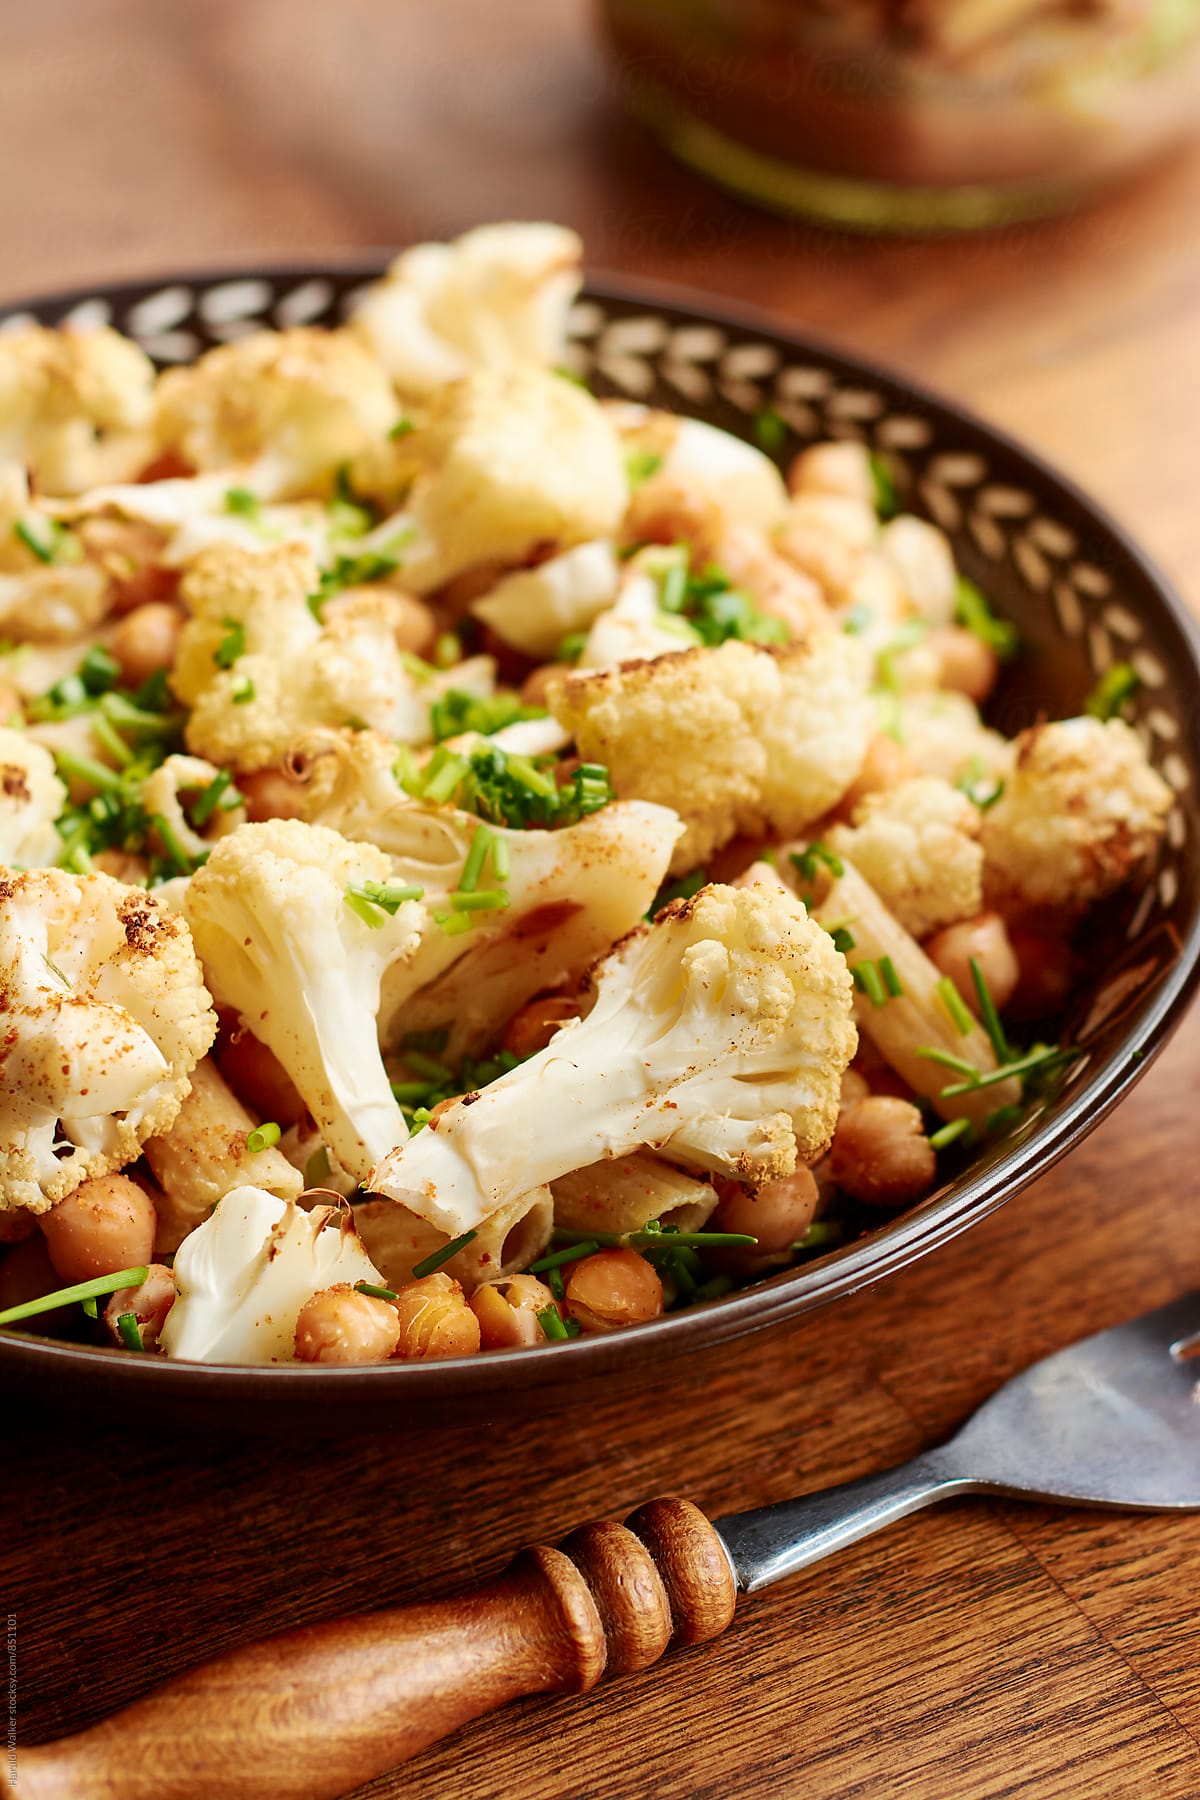 Spicy Roasted Cauliflower And Chickpeas on Penne Pasta